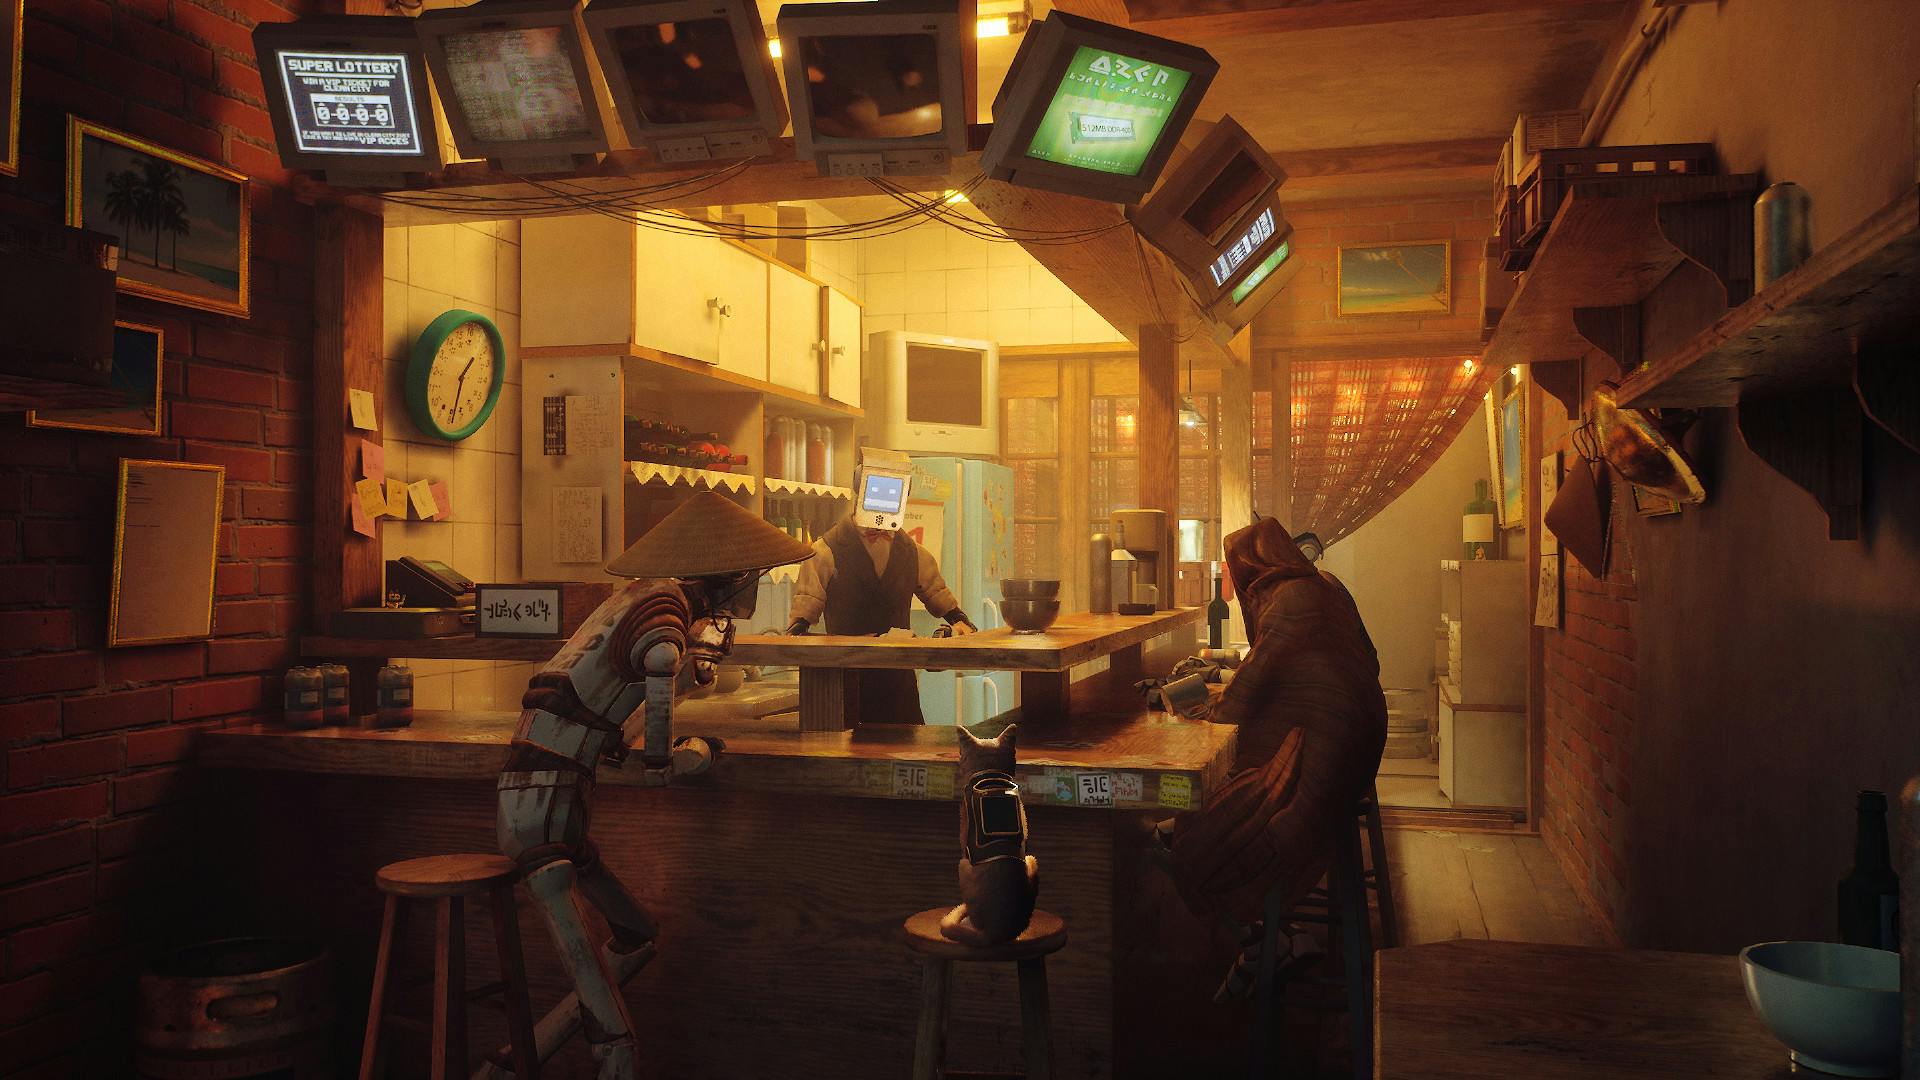 Bar scene: at the counter is a robot in a bamboo hat, to the right of them is  a cat seated on the bar stool, and to the right of the cat is another figure. Behind the bar is the robot bartender, who has a screen for a face. At the top of the bar are a series of monitors. There is a yellow warm glow to the bar. 